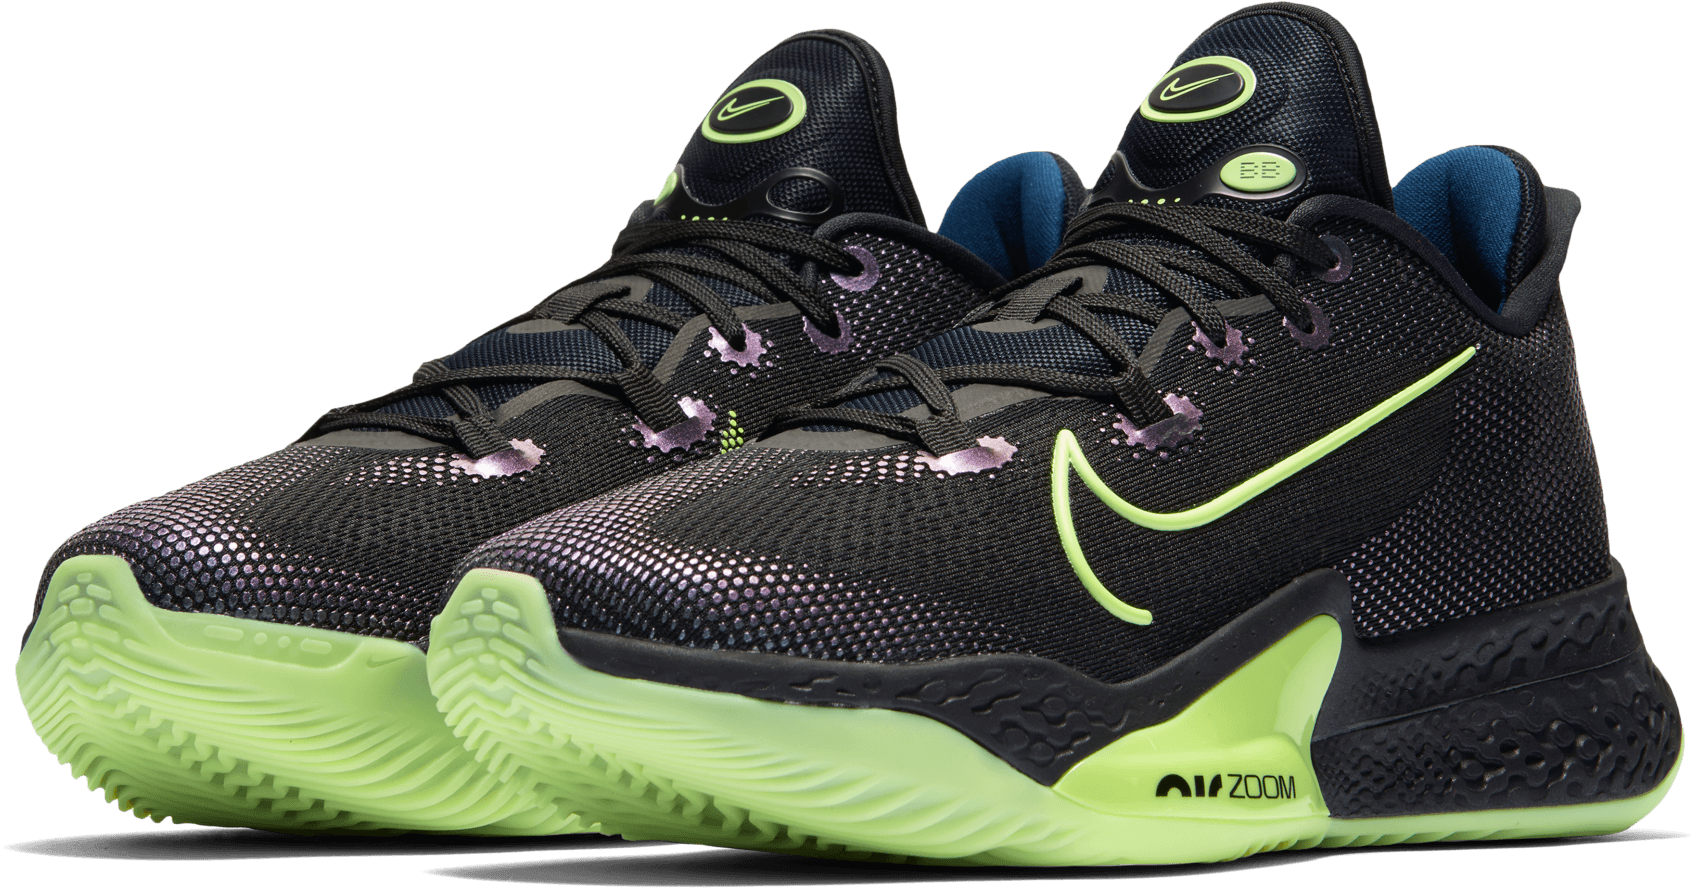 best traction basketball shoes